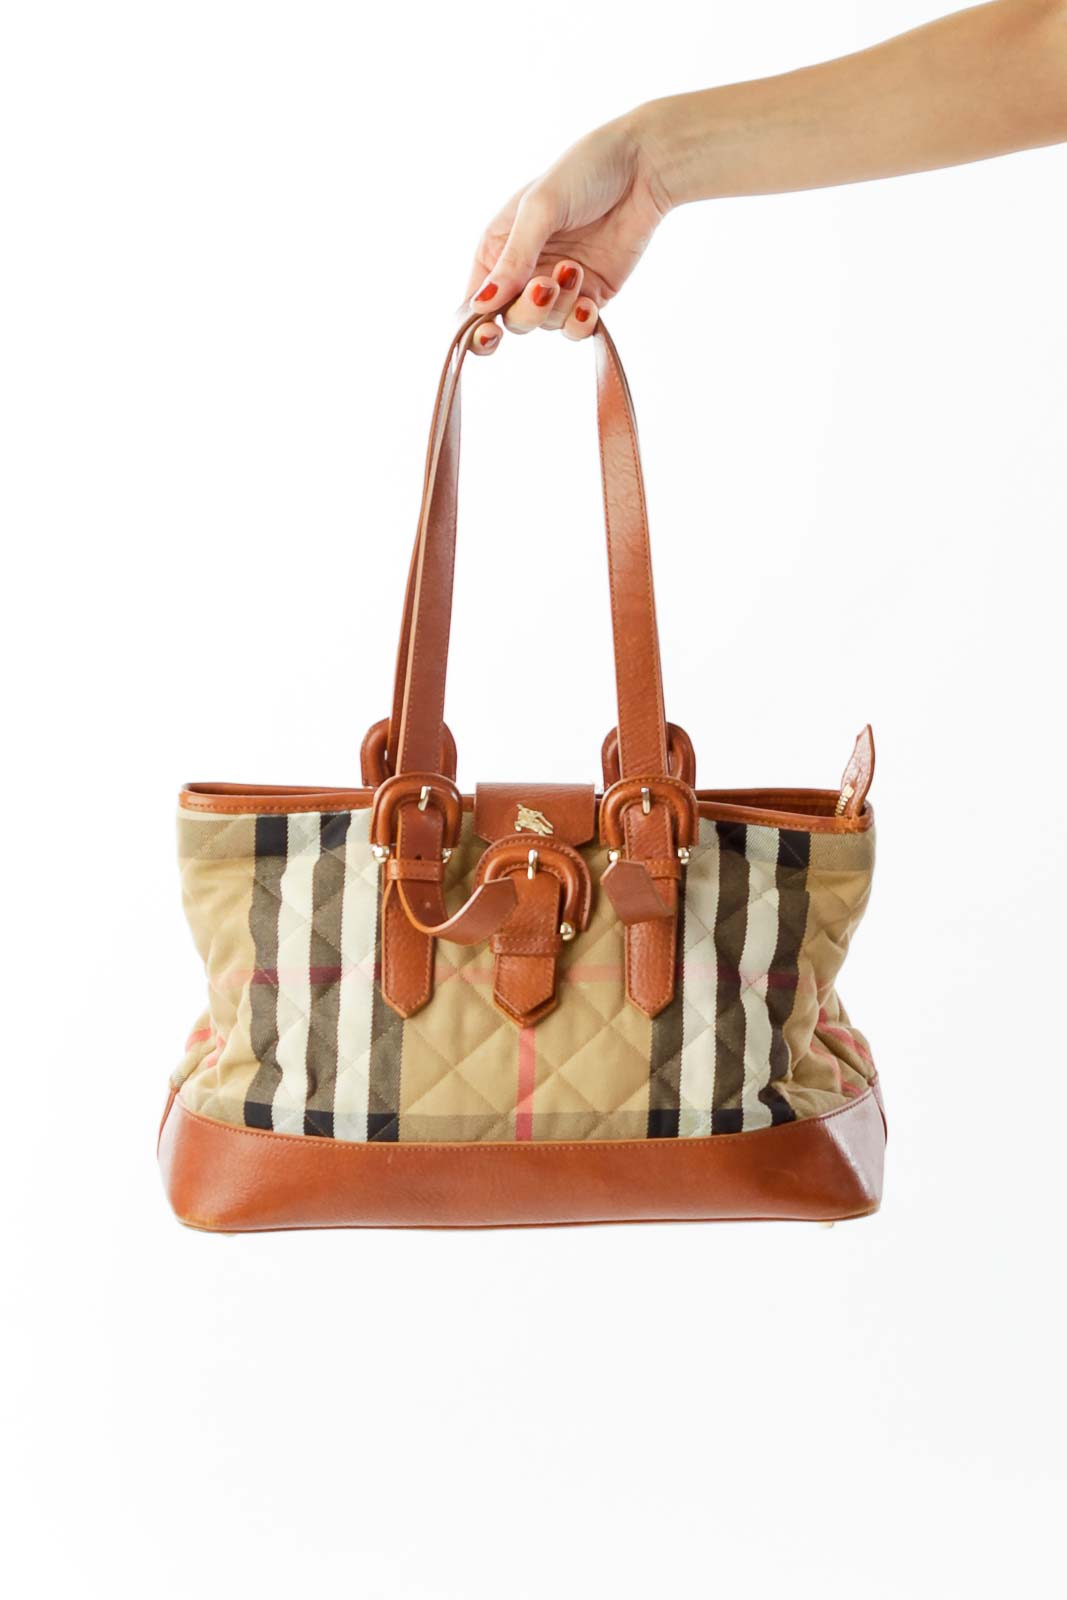 Brown Check-Print Leather Bag Front